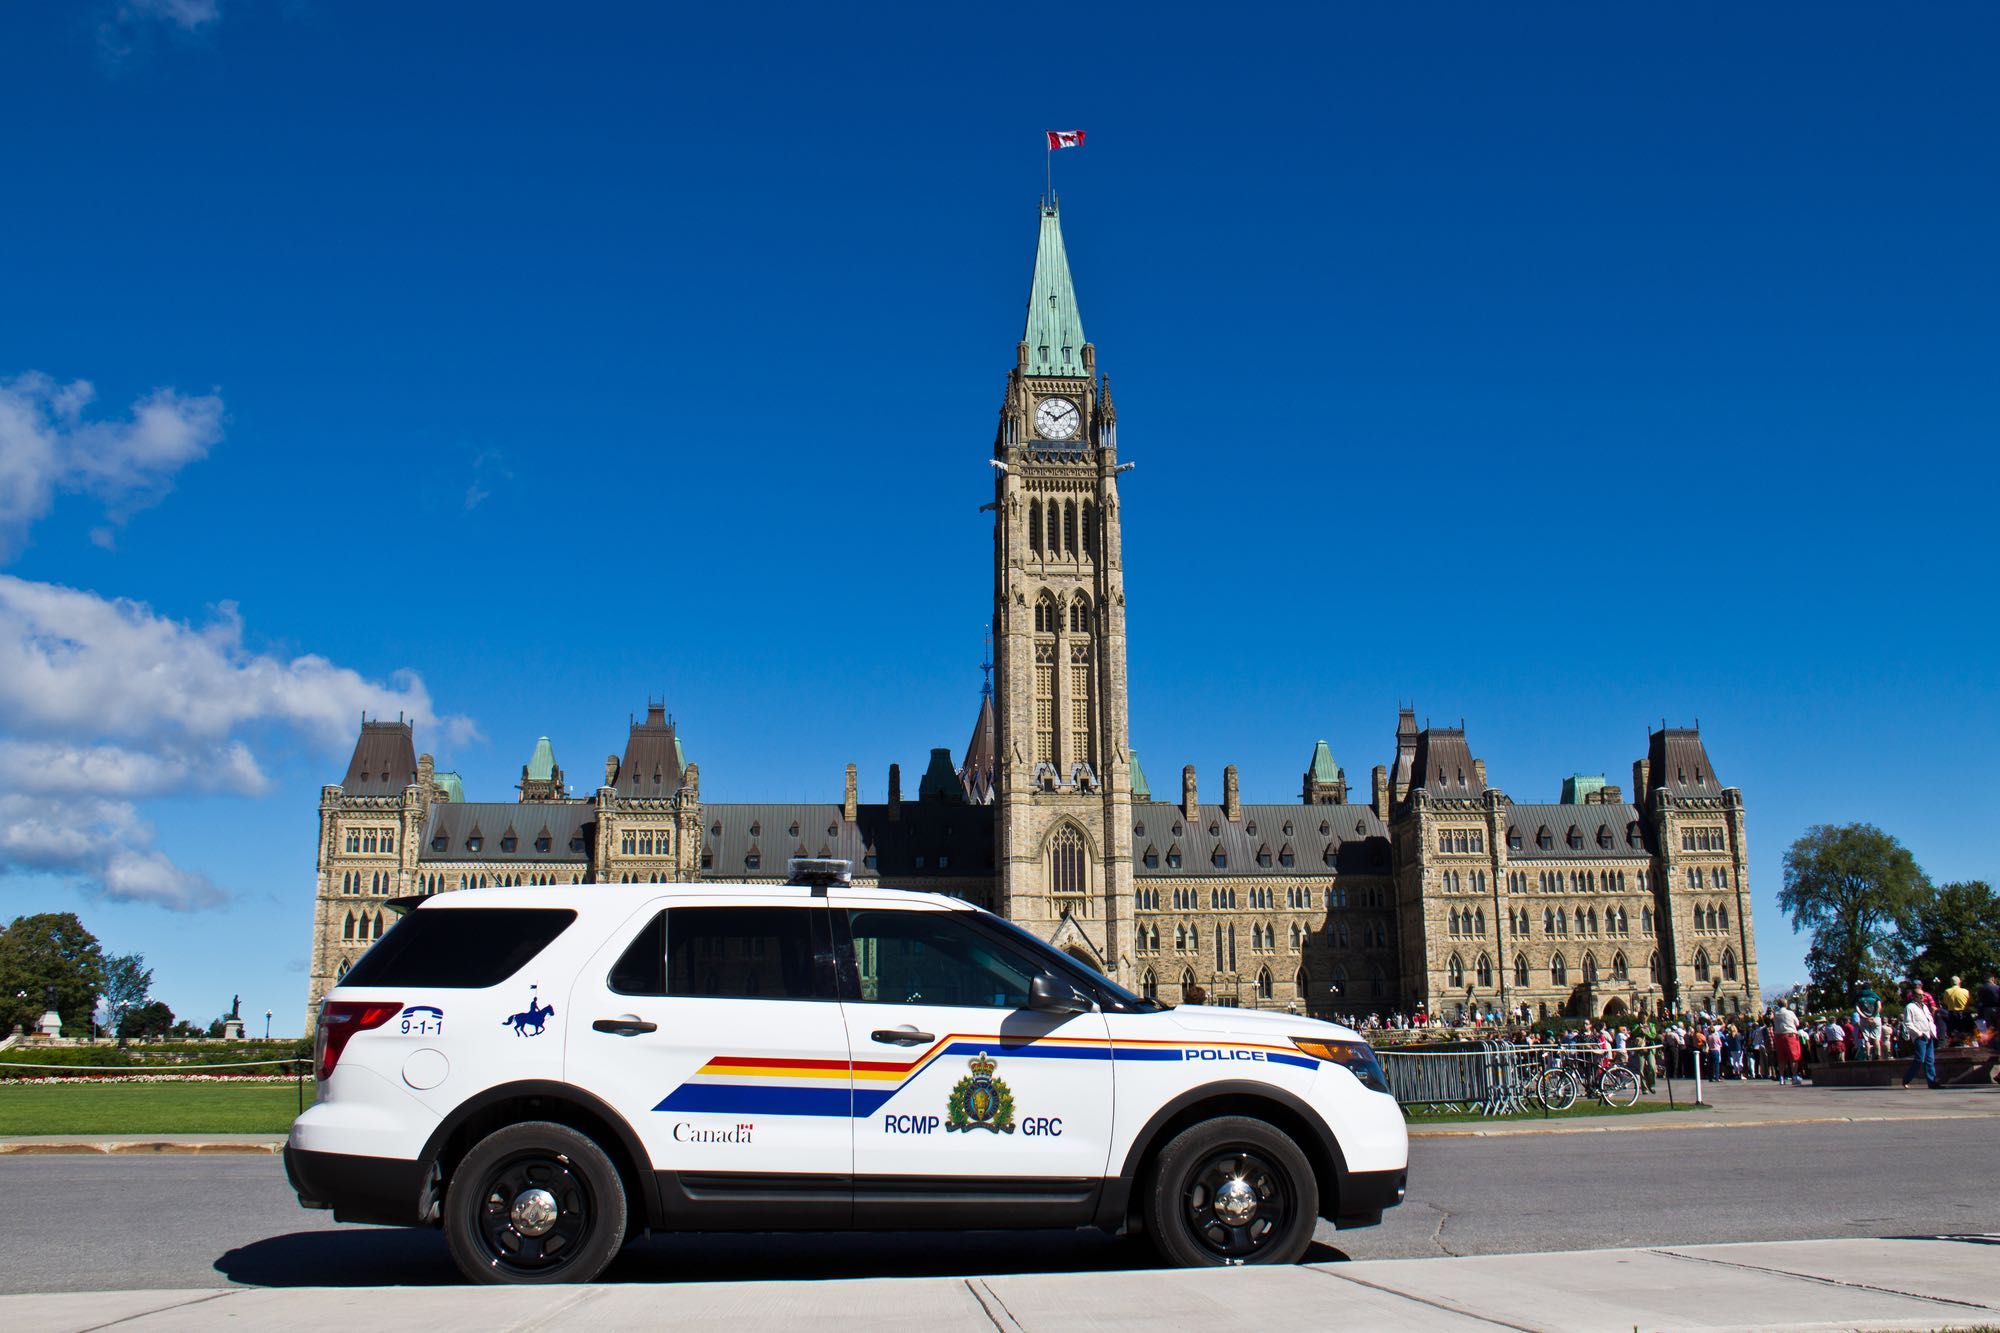 RCMP care passing parliament hill amid data breach controversy